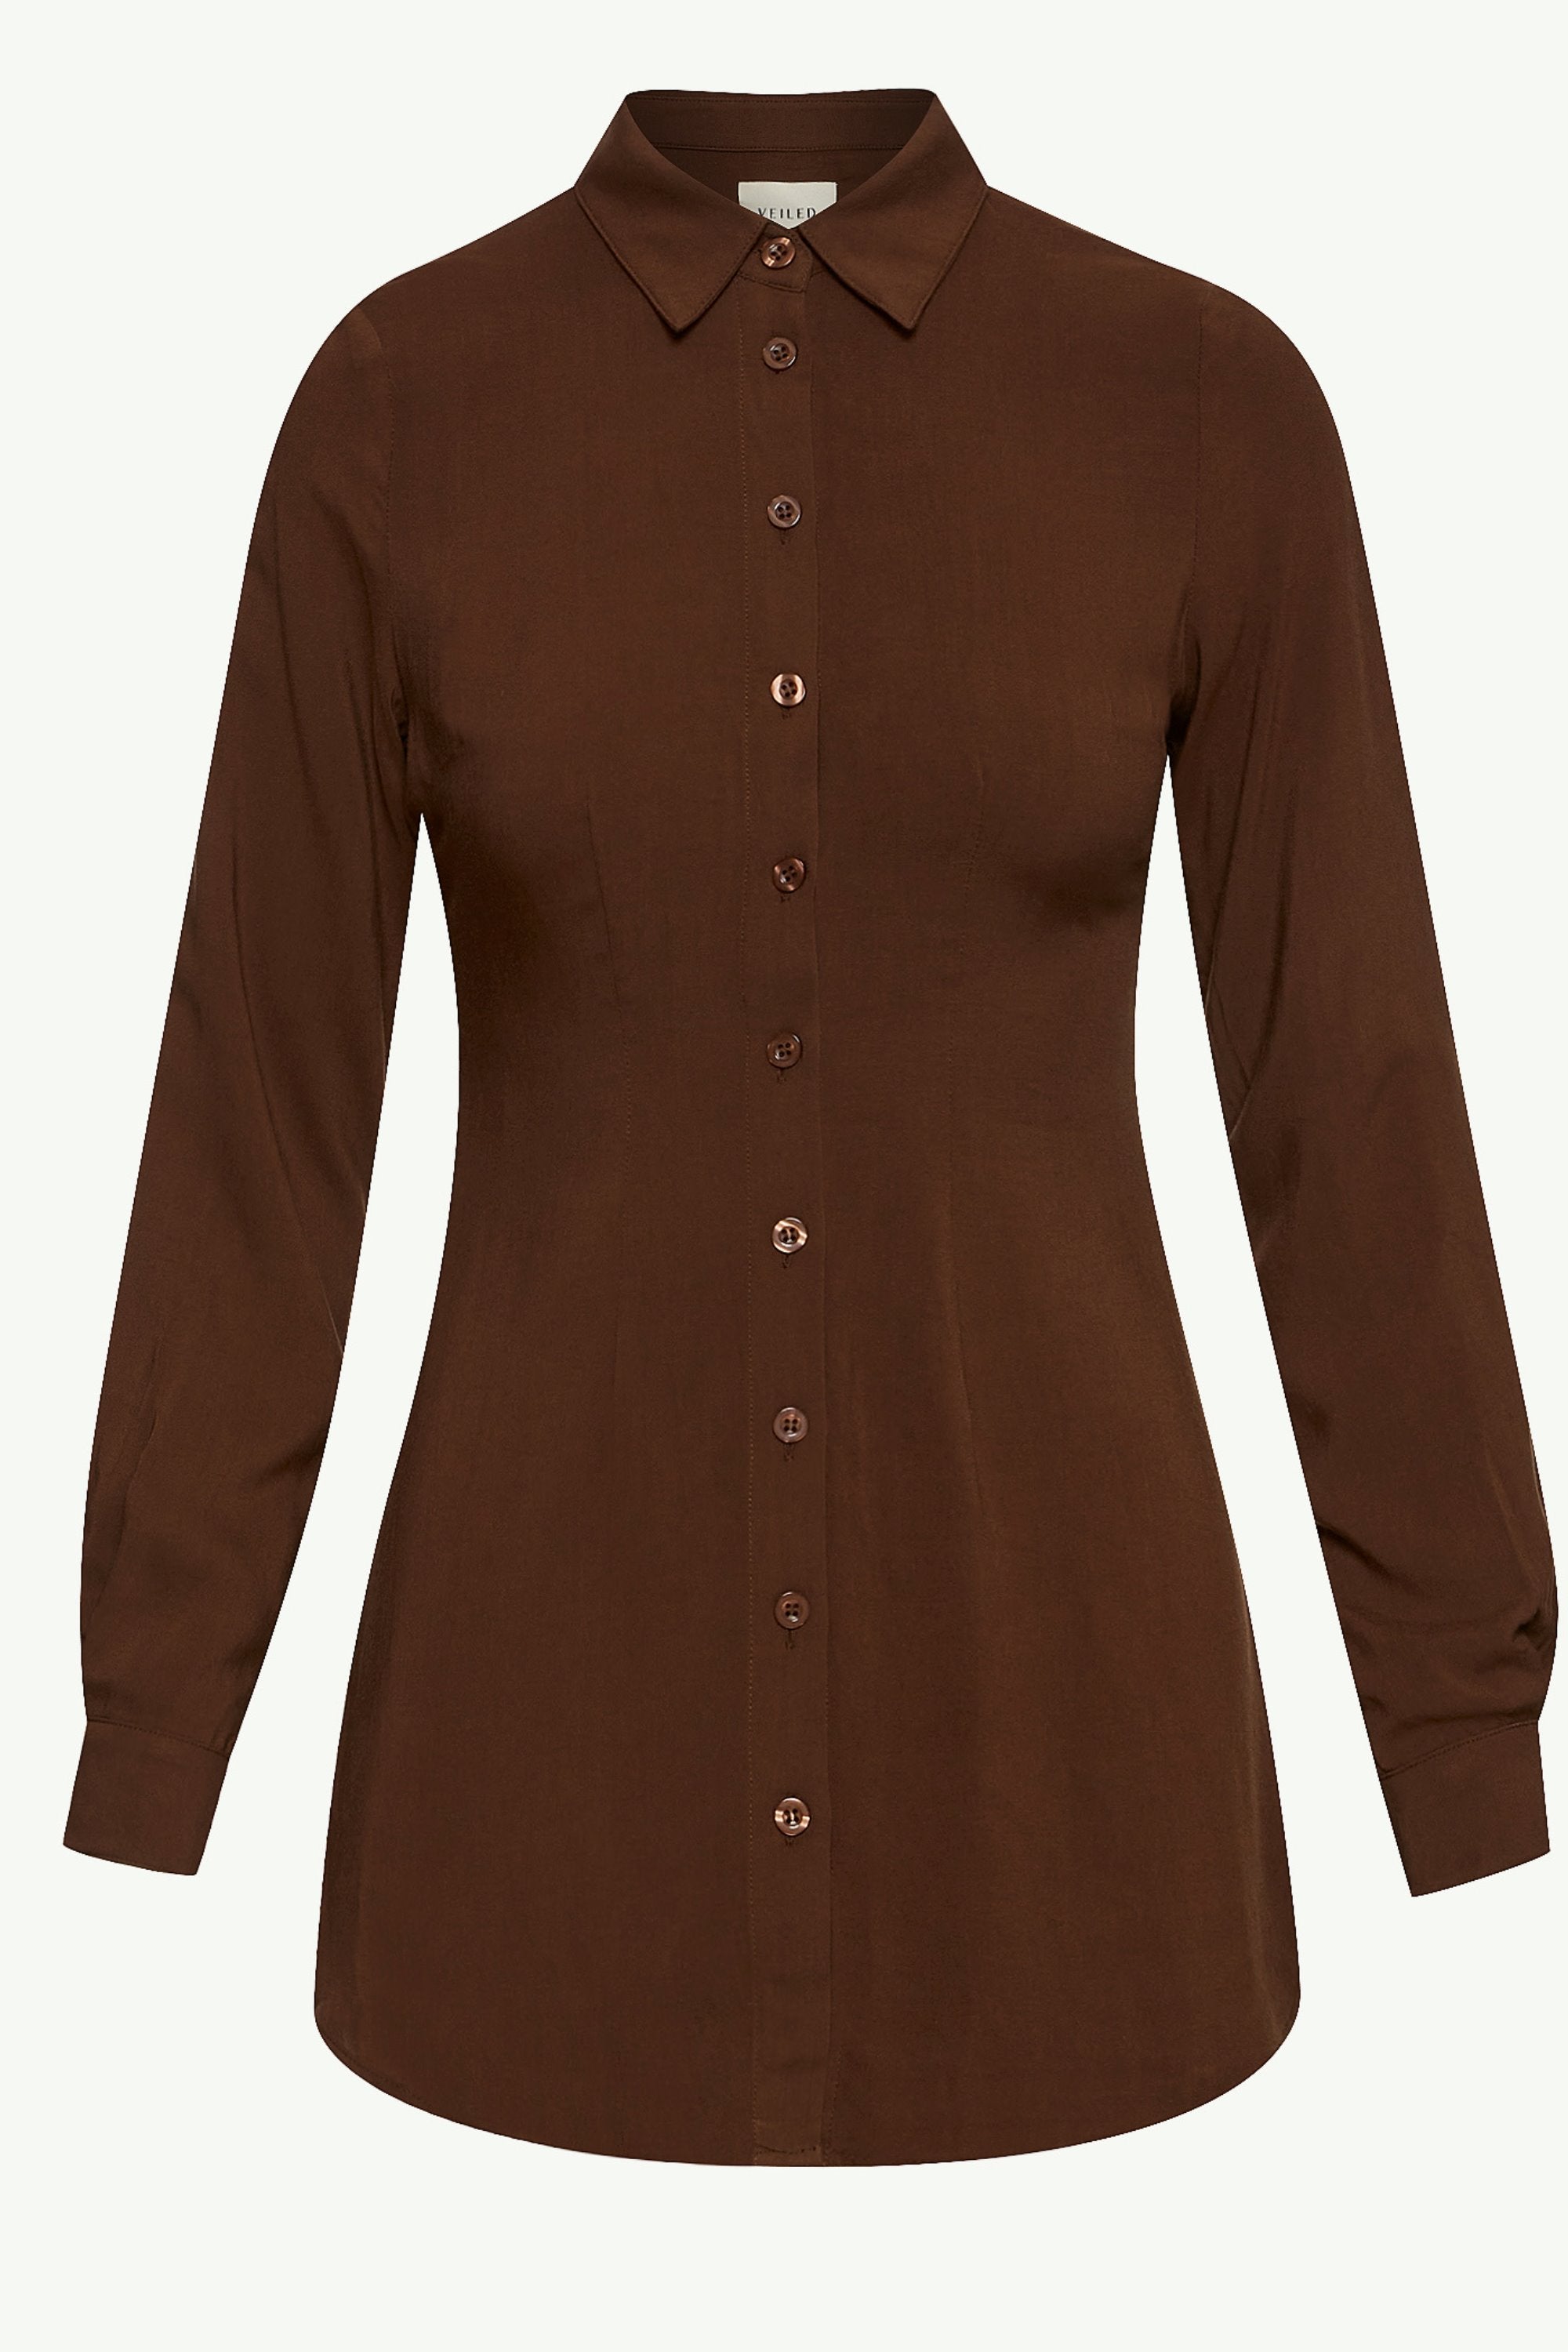 Sarah Fitted Button Down Top - Dark Brown Clothing epschoolboard 